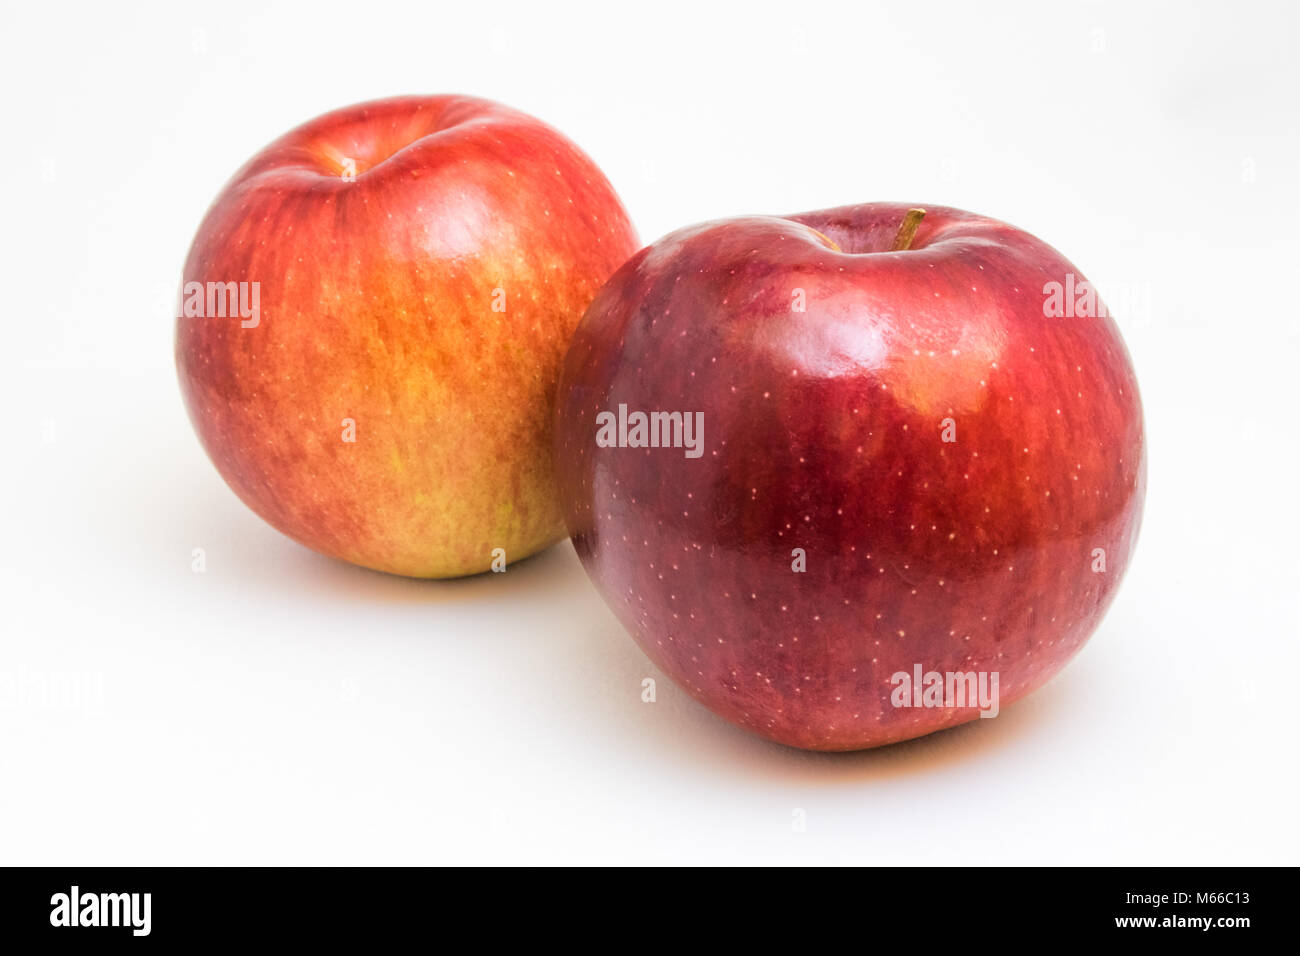 Small Red Delicious Apple - Each, Small/ 1 Count - Smith's Food and Drug